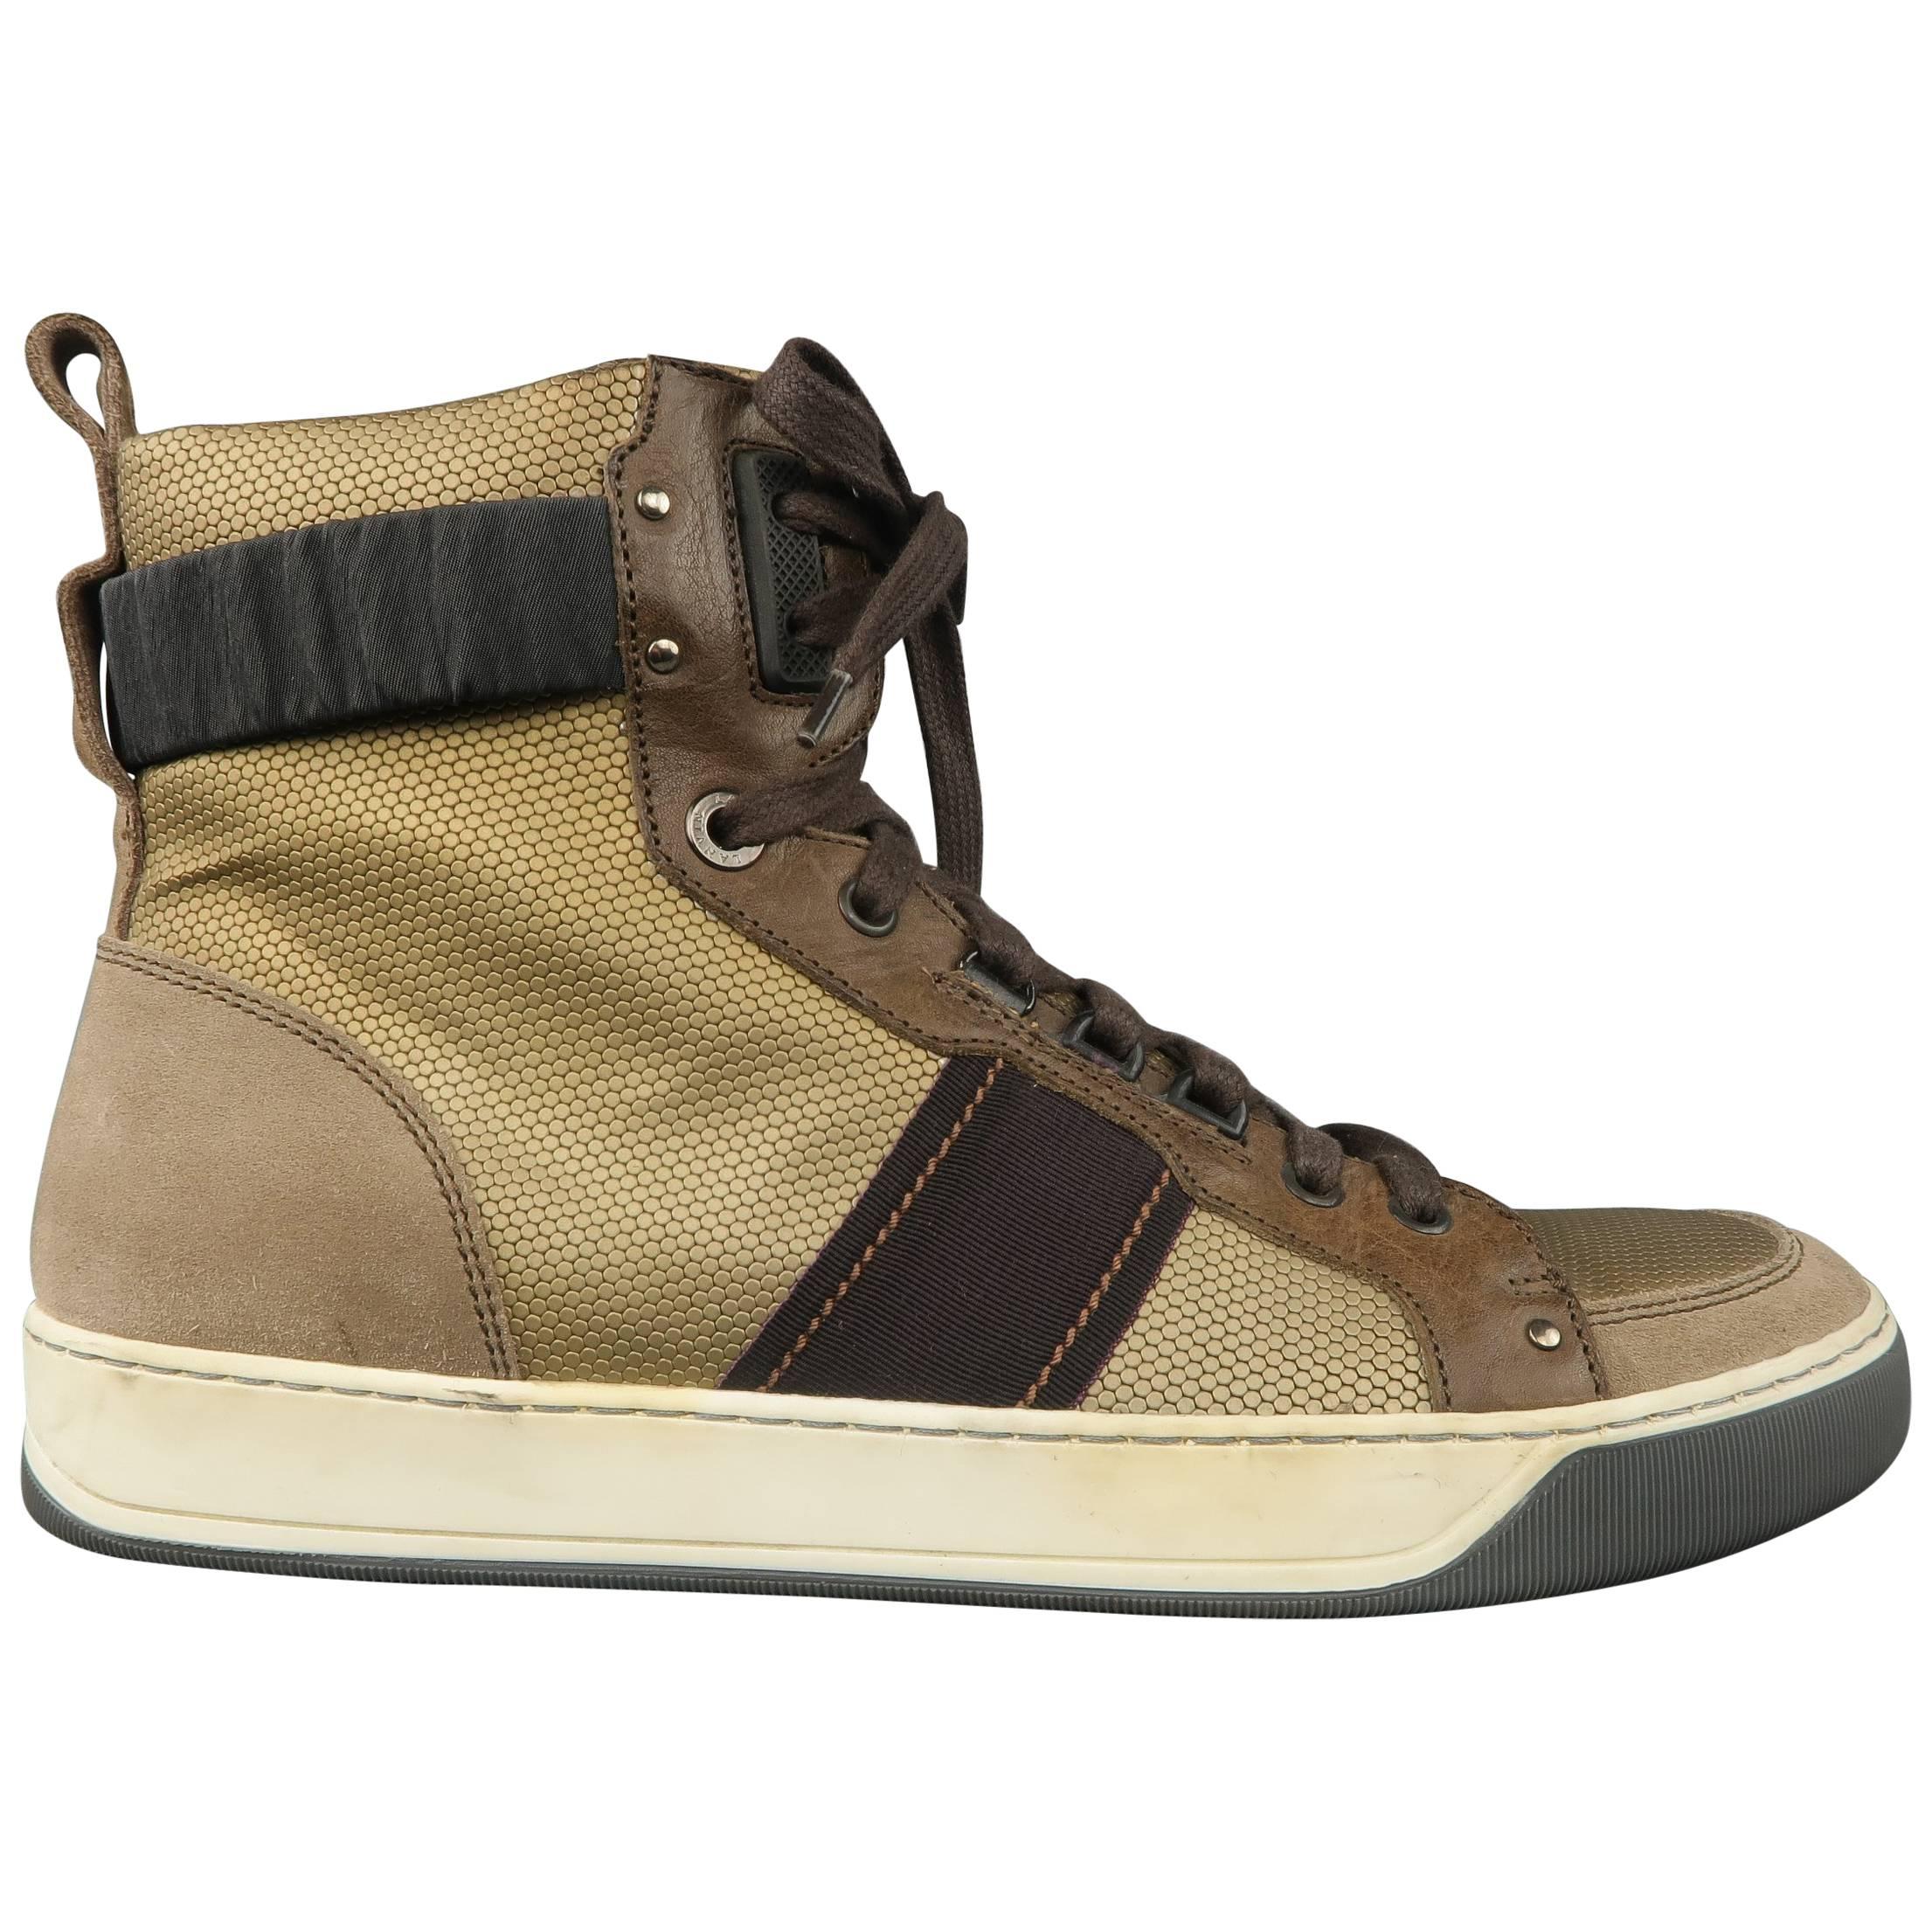 Men's LANVIN Size 8 Metallic Gold & Taupe Suede High Top Cuff Sneakers